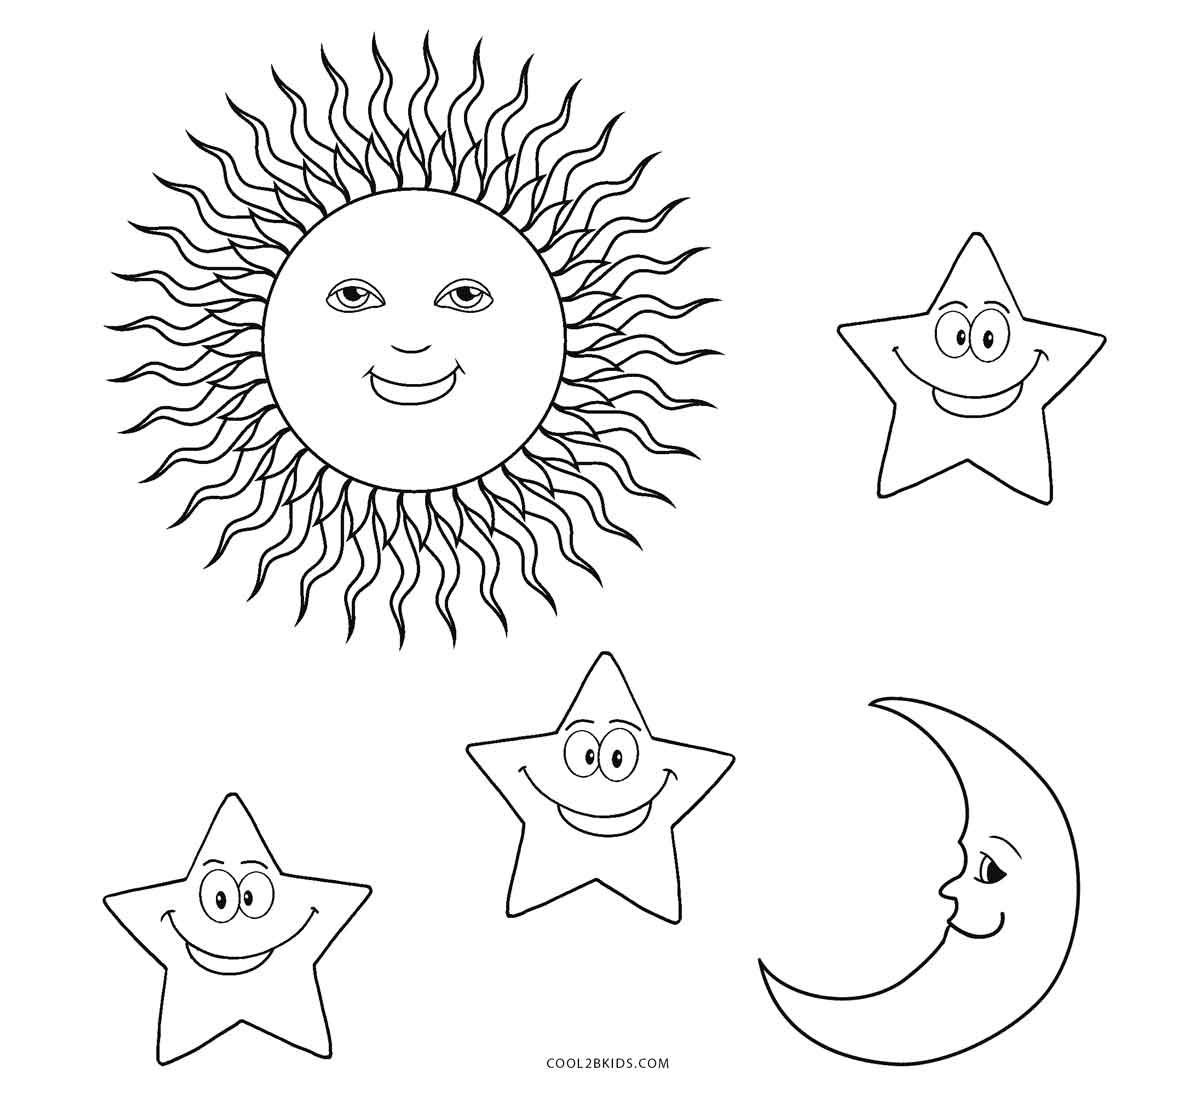 Free Printable Sun Coloring Pages For Kids | Cool2bKids